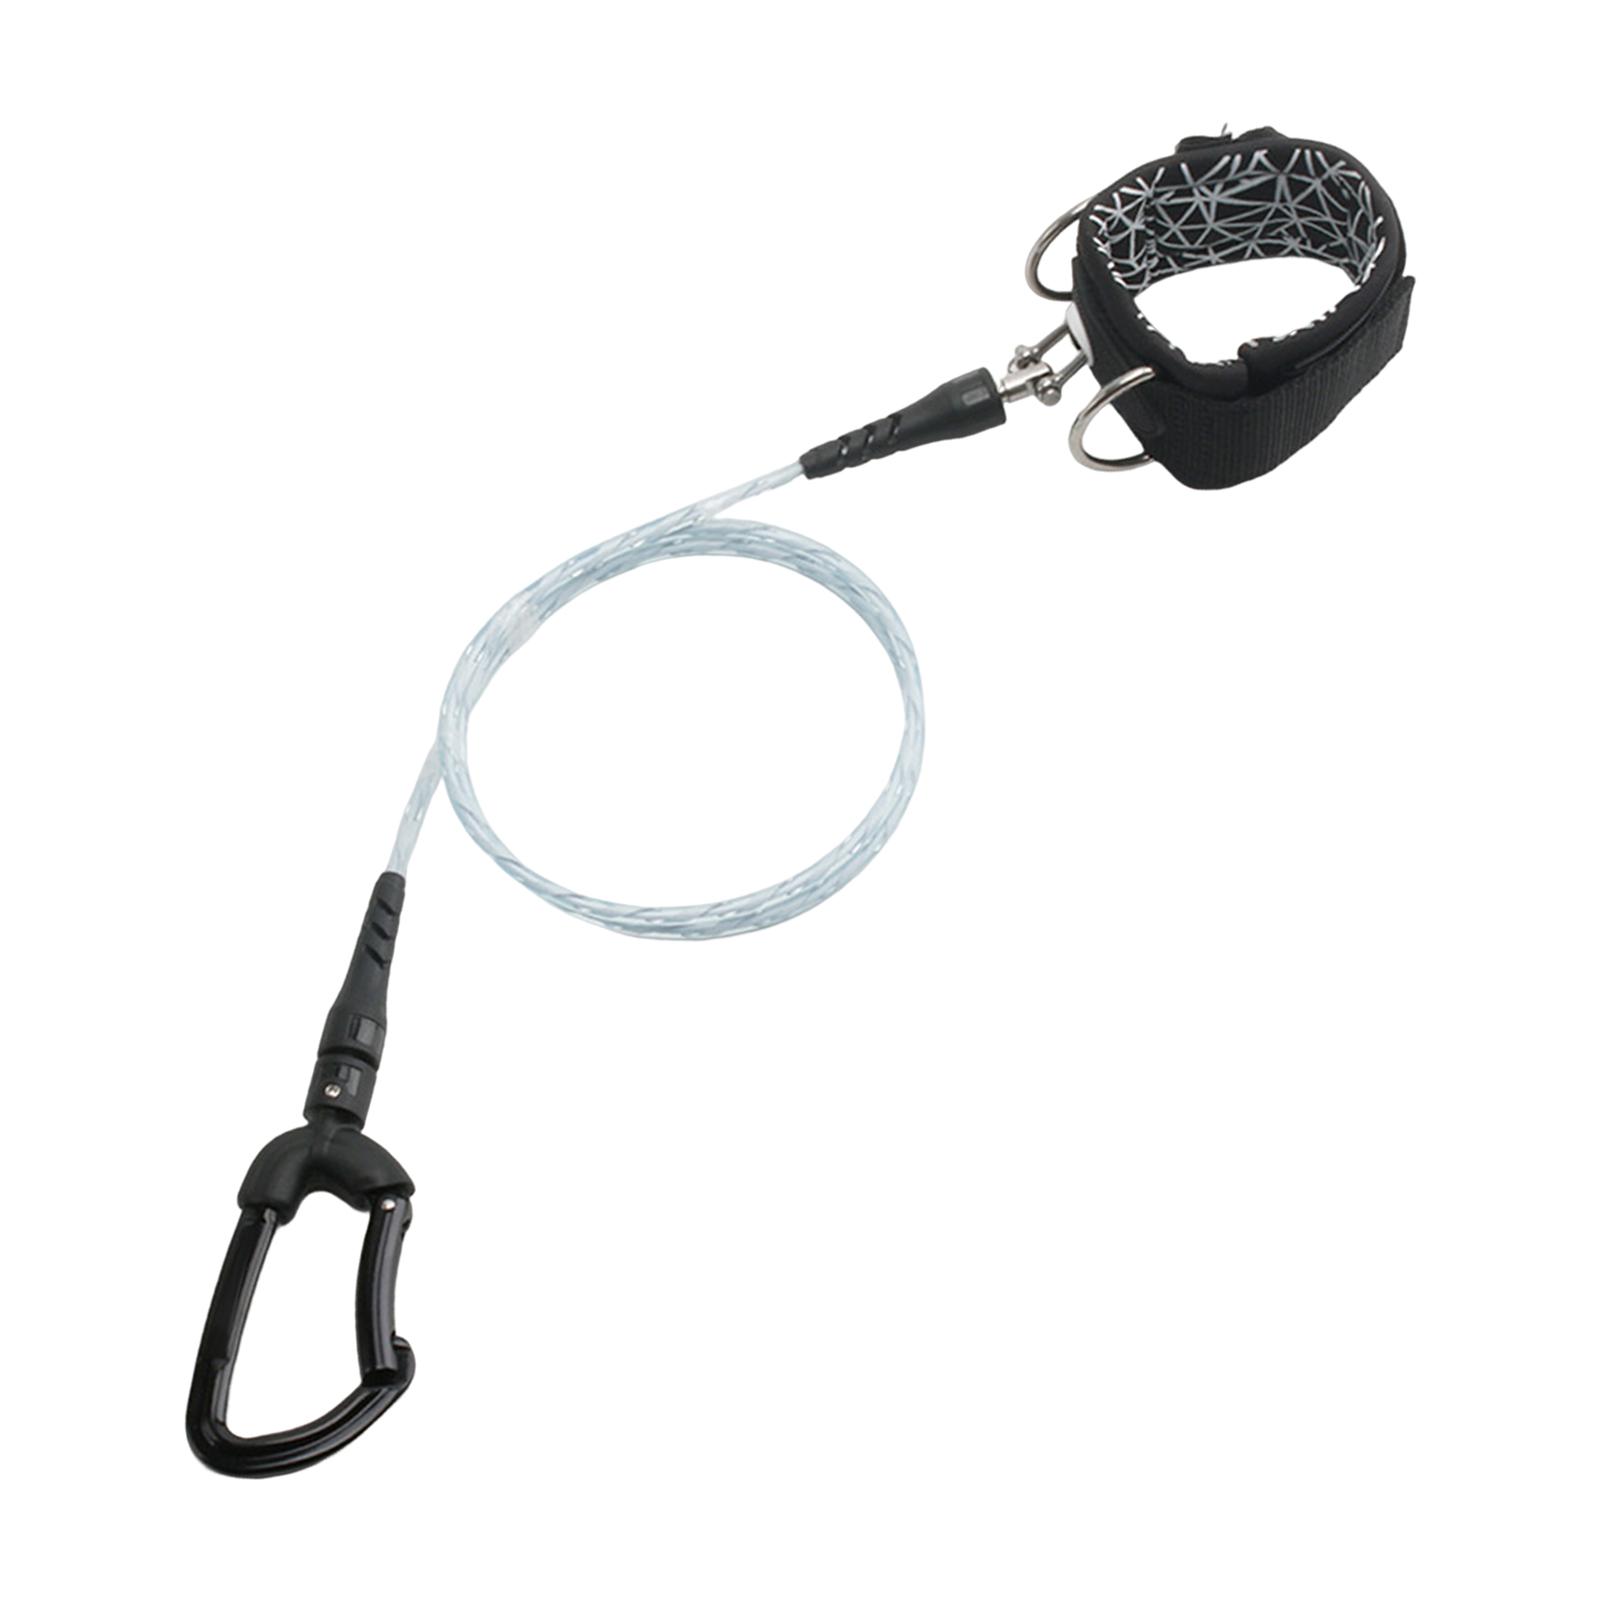 Freediving Lanyard Leash Diving Safety Rope for Water Sport Freediving Gear